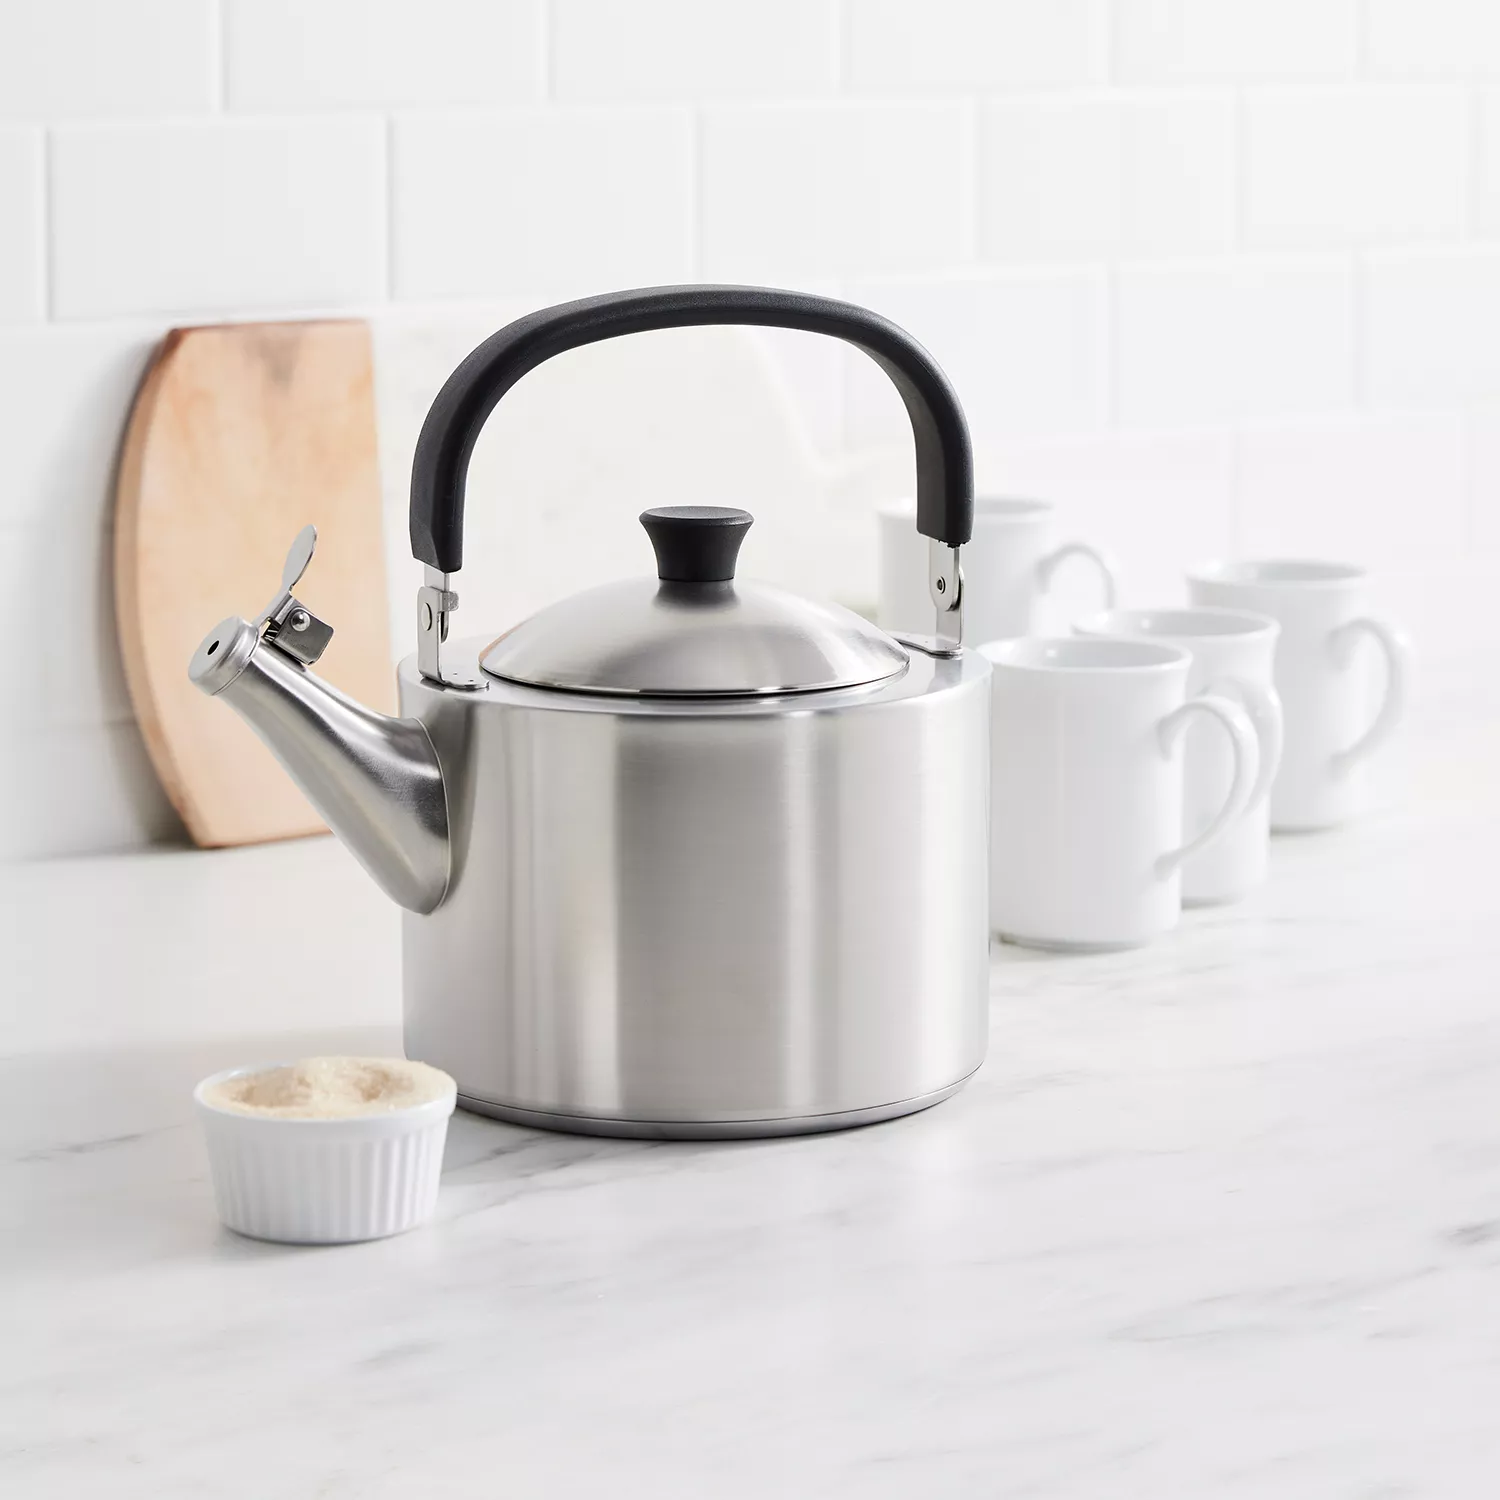 The London Sip 5-Cups Stainless Steel Kettle with Beverage